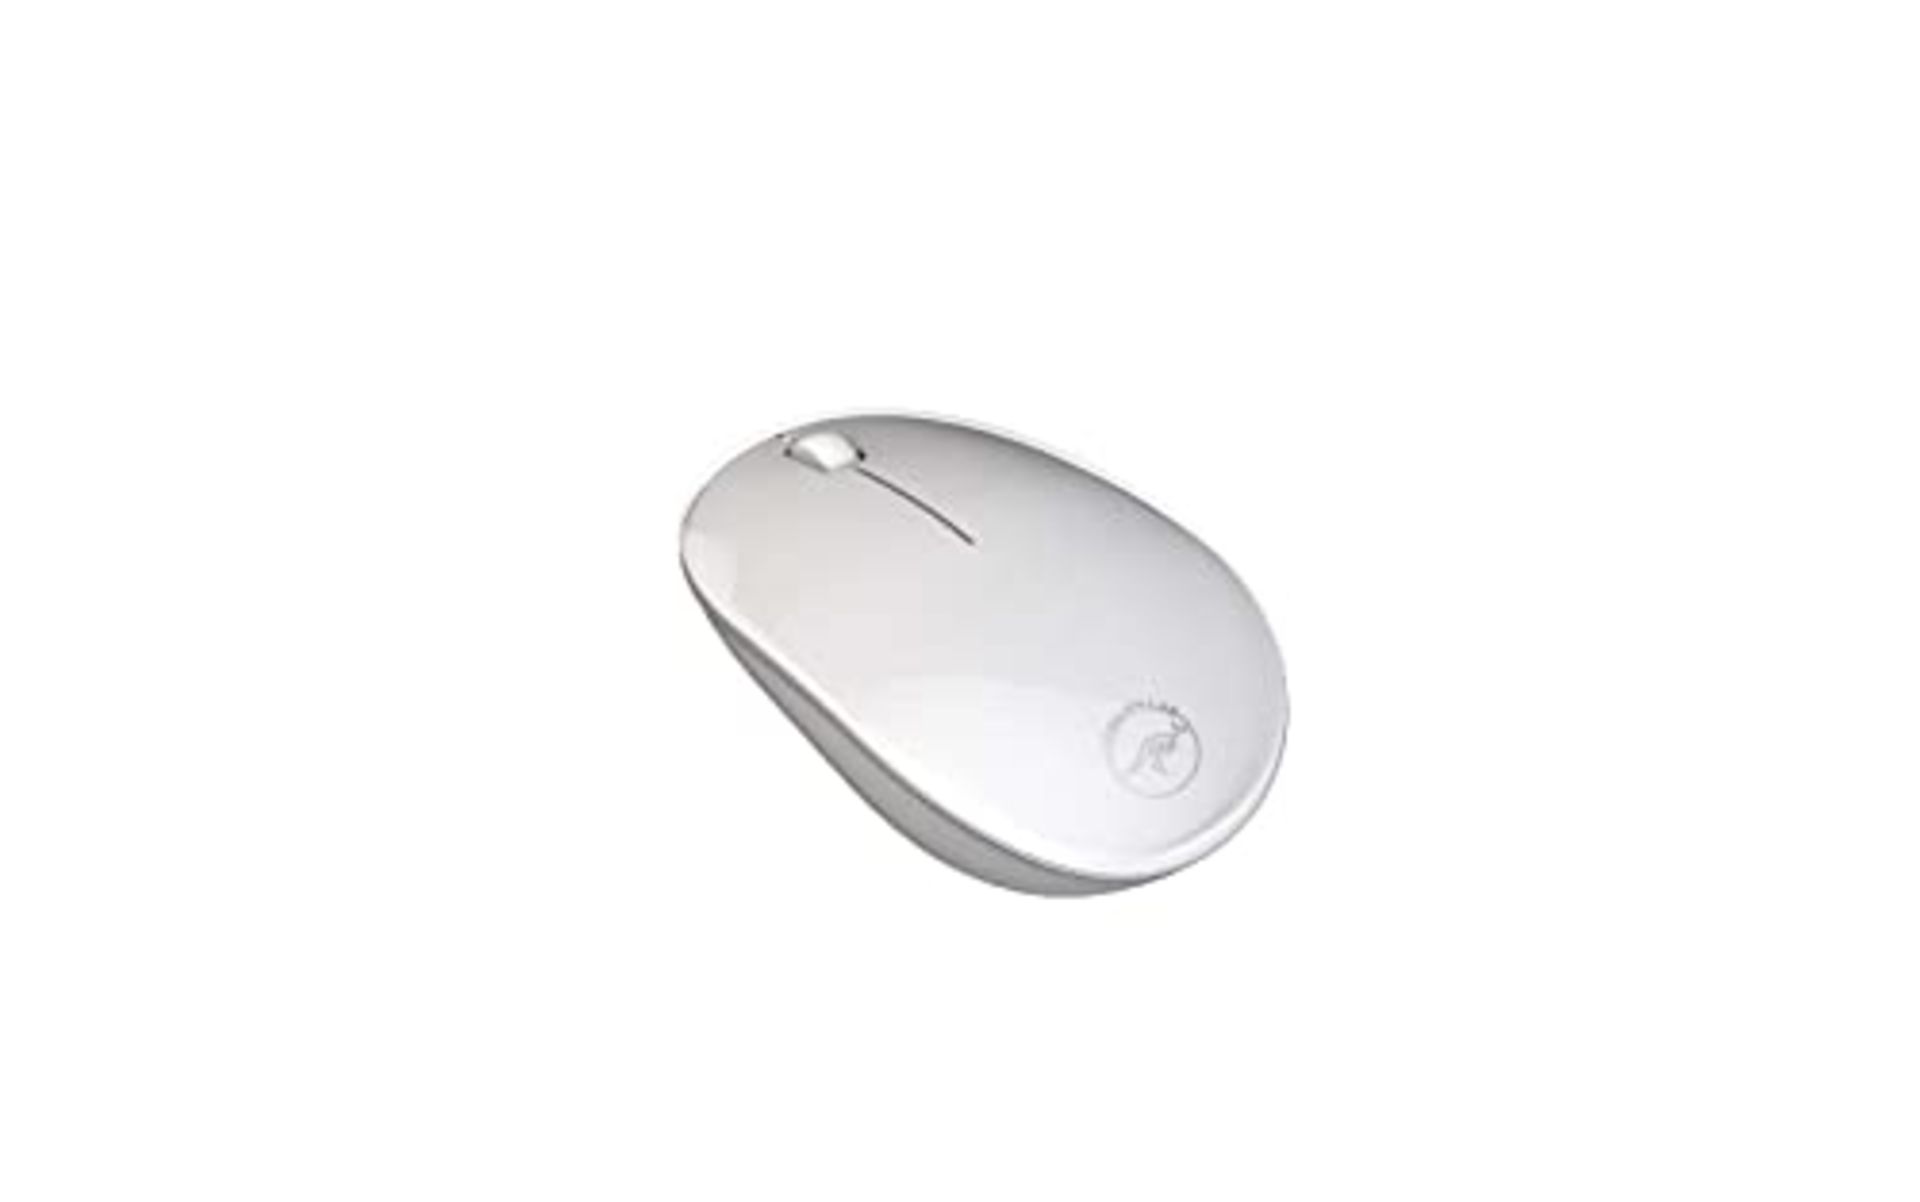 Mobility Lab ML301877 Bluetooth Laser Mouse 1600 DPI for Mac and PC - White